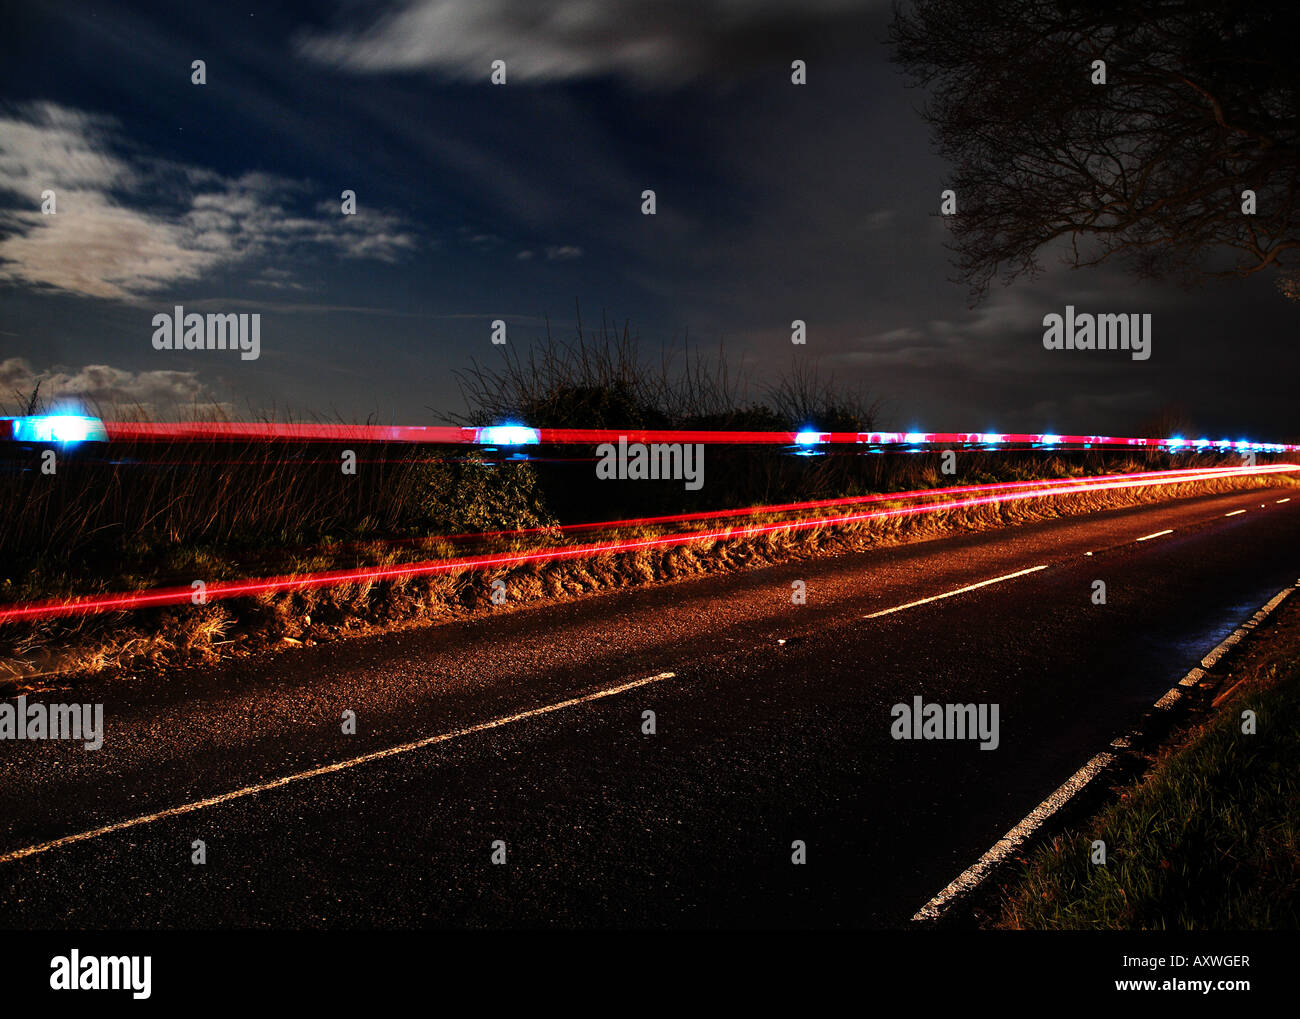 Emergency call – a police car's flashing lights trail on a country road at night Stock Photo